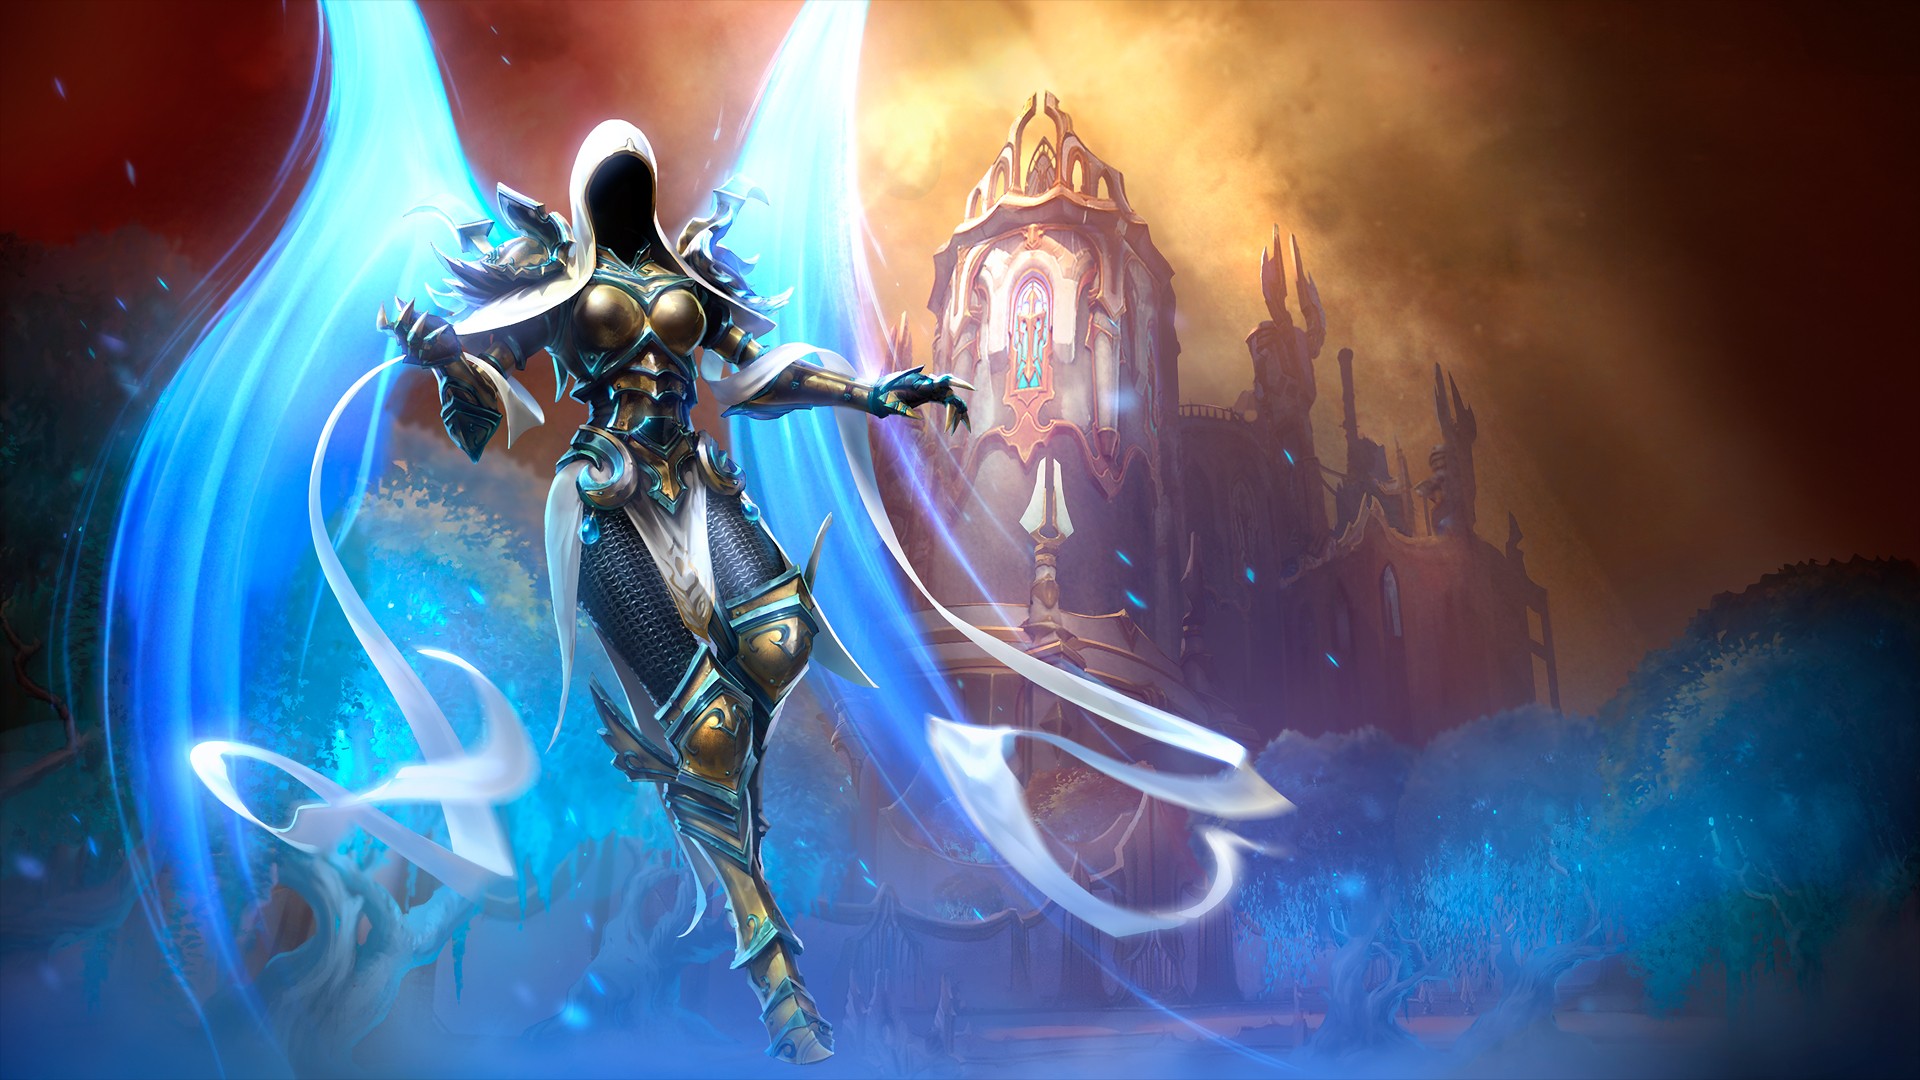 General 1920x1080 Heroes of the Storm Auriel (Diablo) video games cyan wings video game characters Blizzard Entertainment